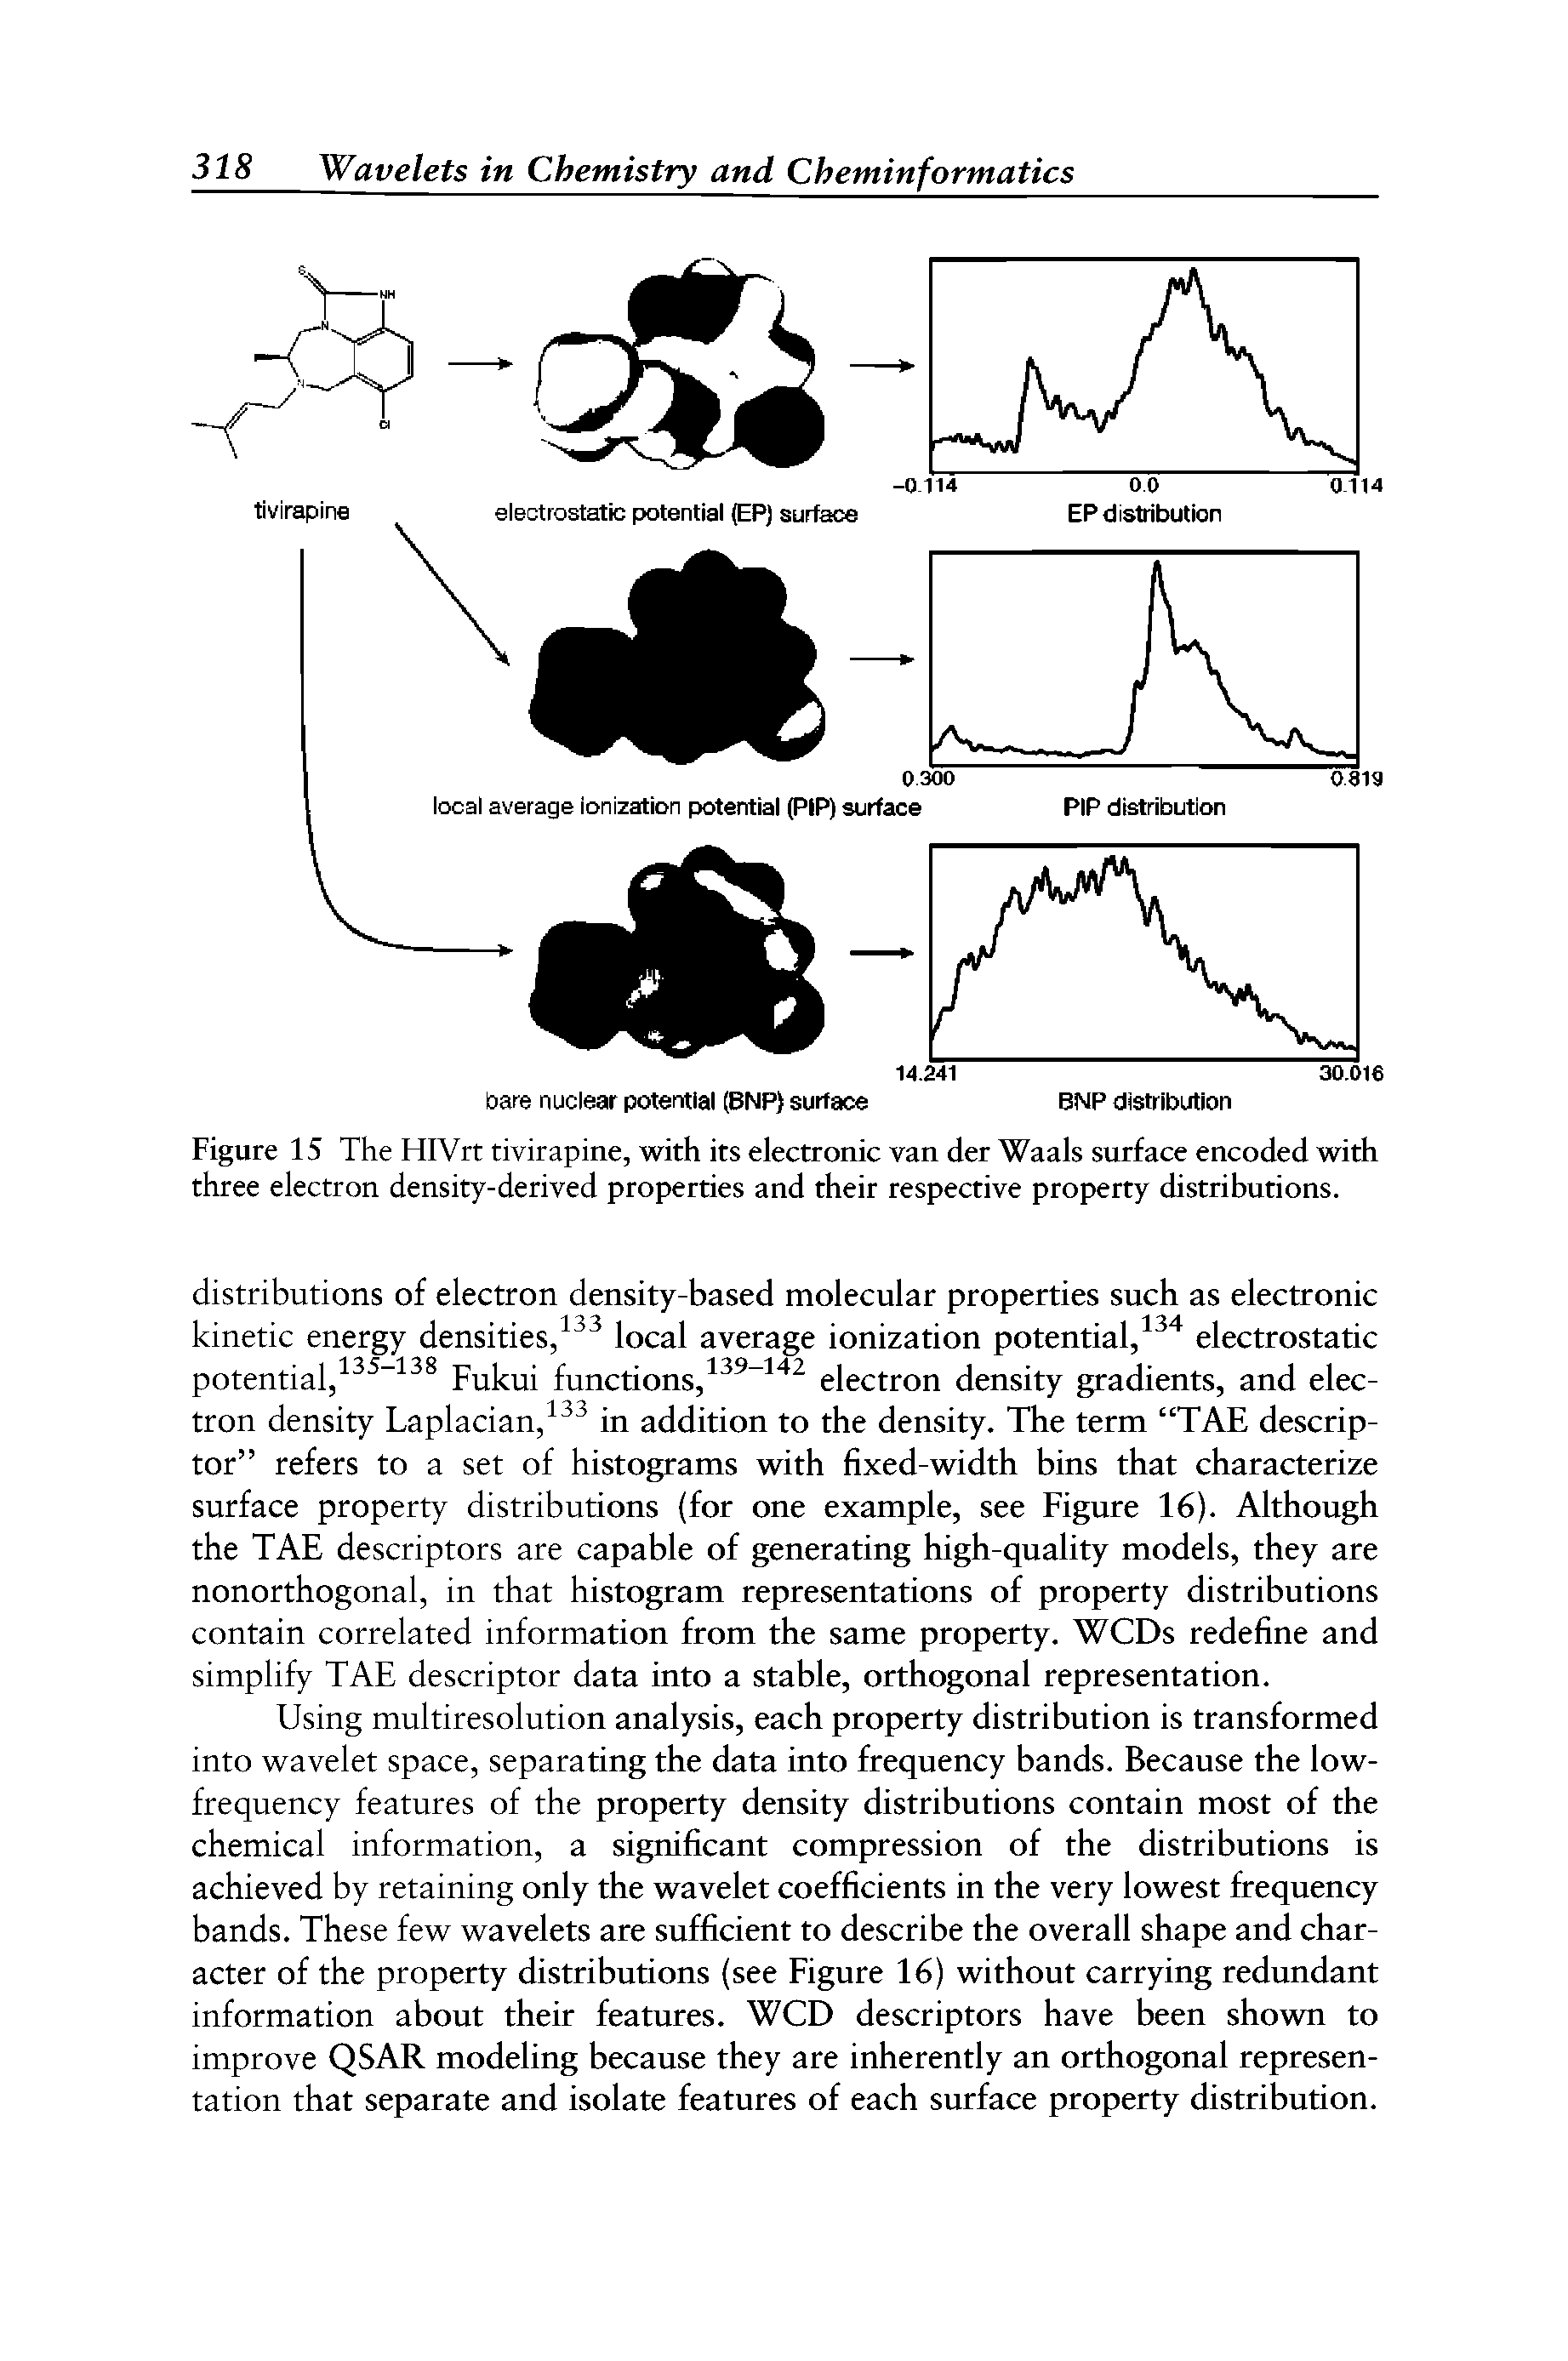 Figure 15 The HIVrt tivirapine, with its electronic van der Waals surface encoded with three electron density-derived properties and their respective property distributions.